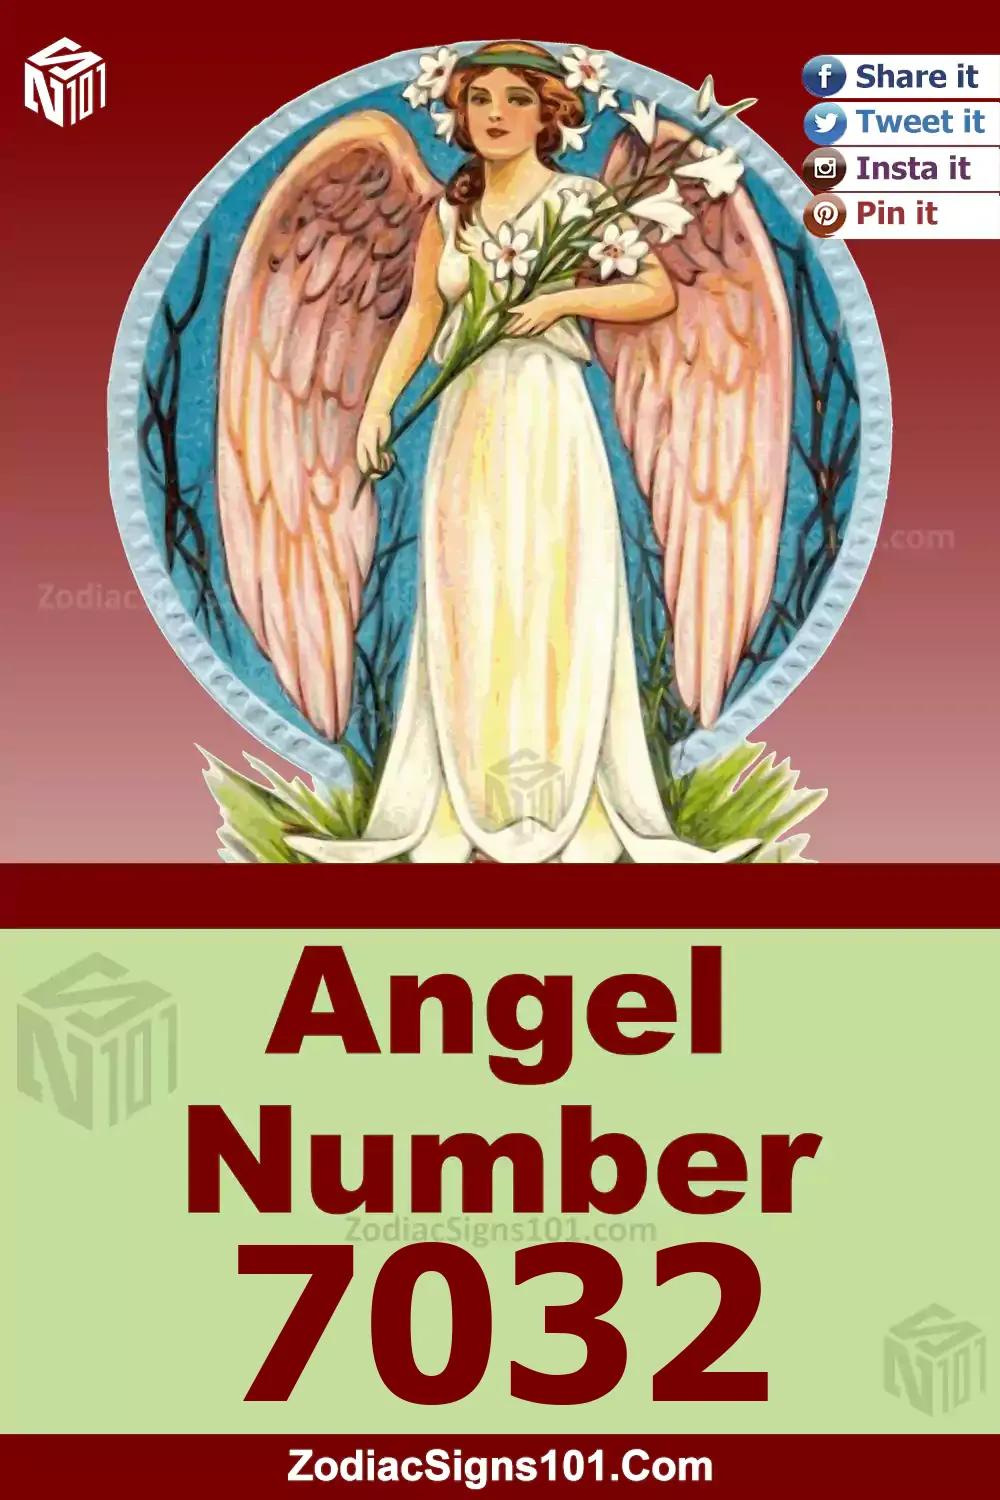 7032 Angel Number Meaning